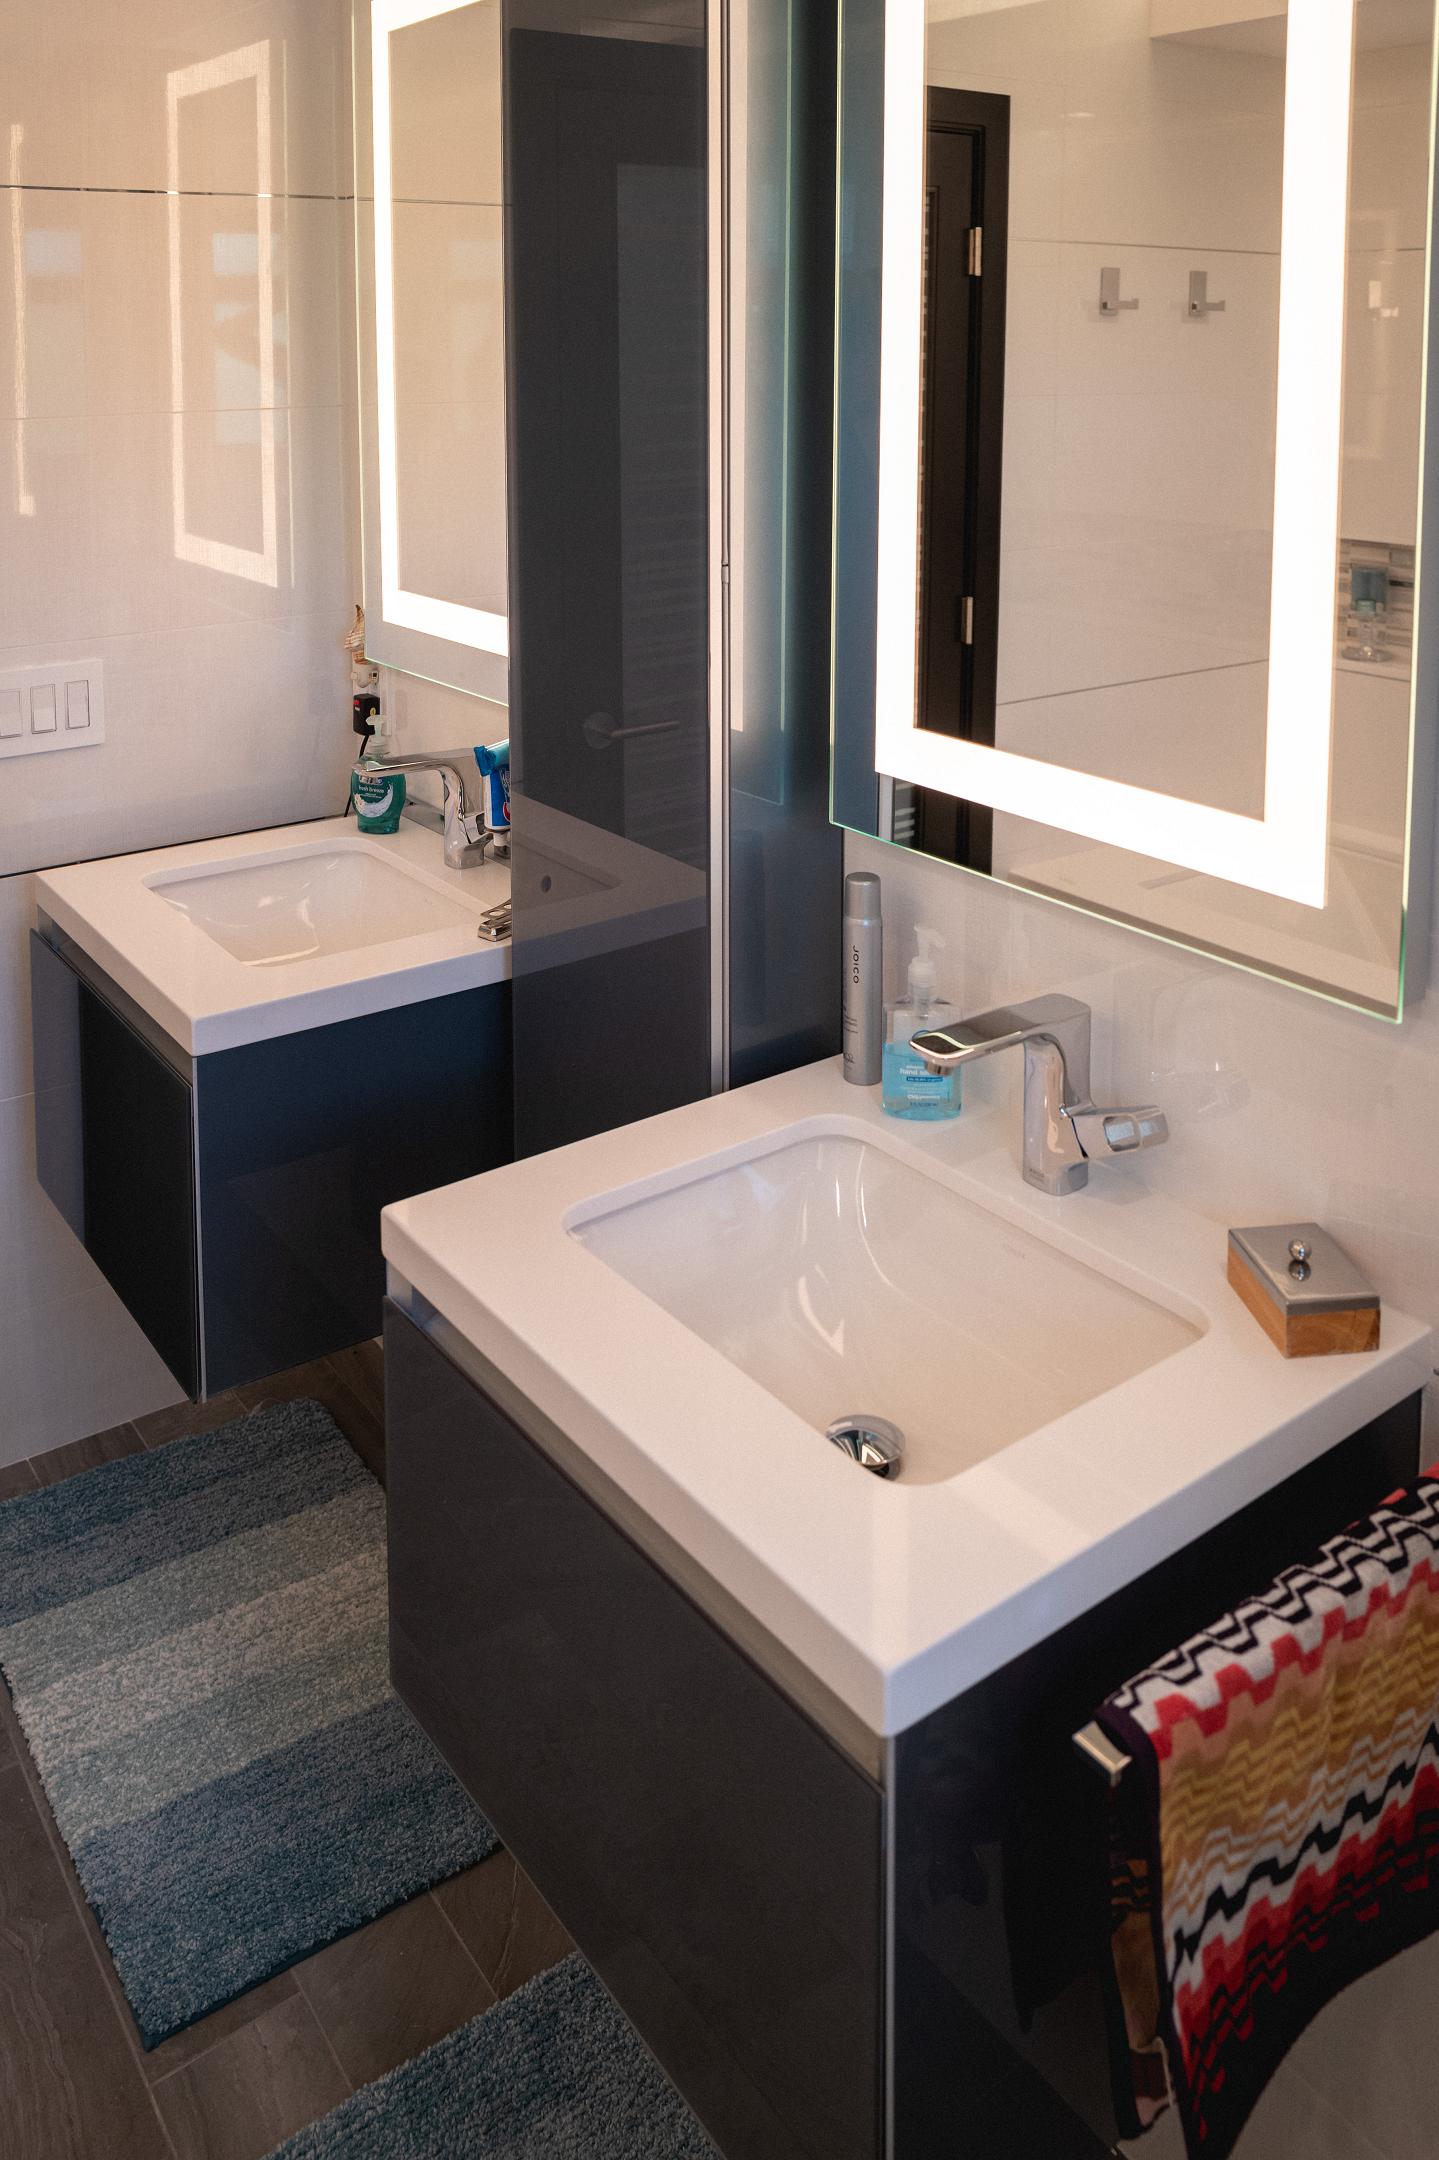 Modern bathroom with illuminated mirrors and double sinks.